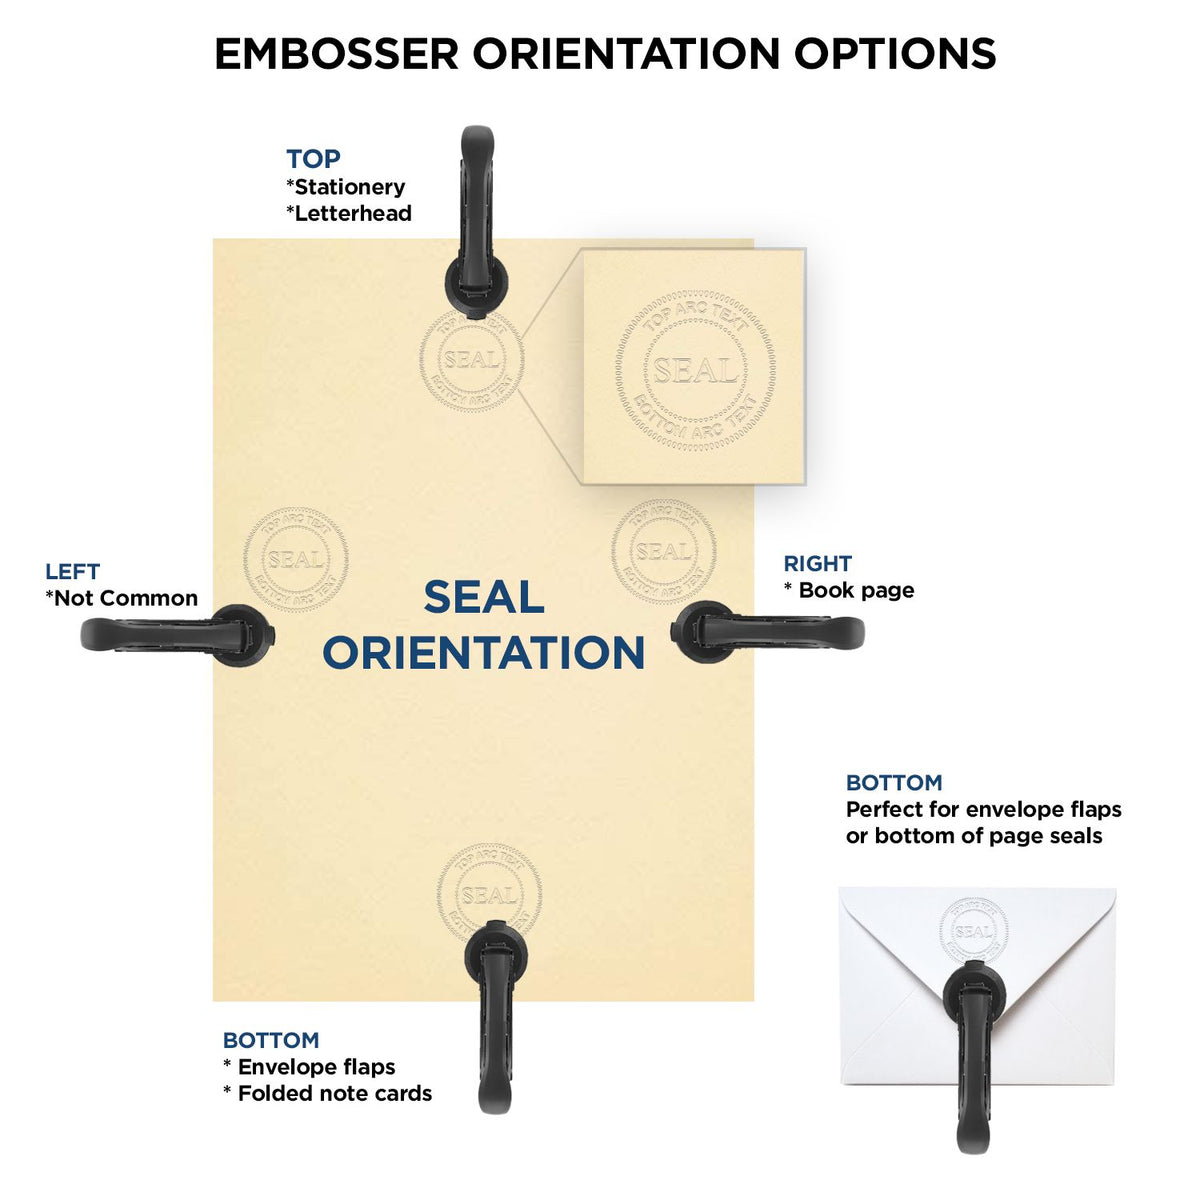 An infographic for the Vermont Geologist Desk Seal showing embosser orientation, this is showing examples of a top, bottom, right and left insert.